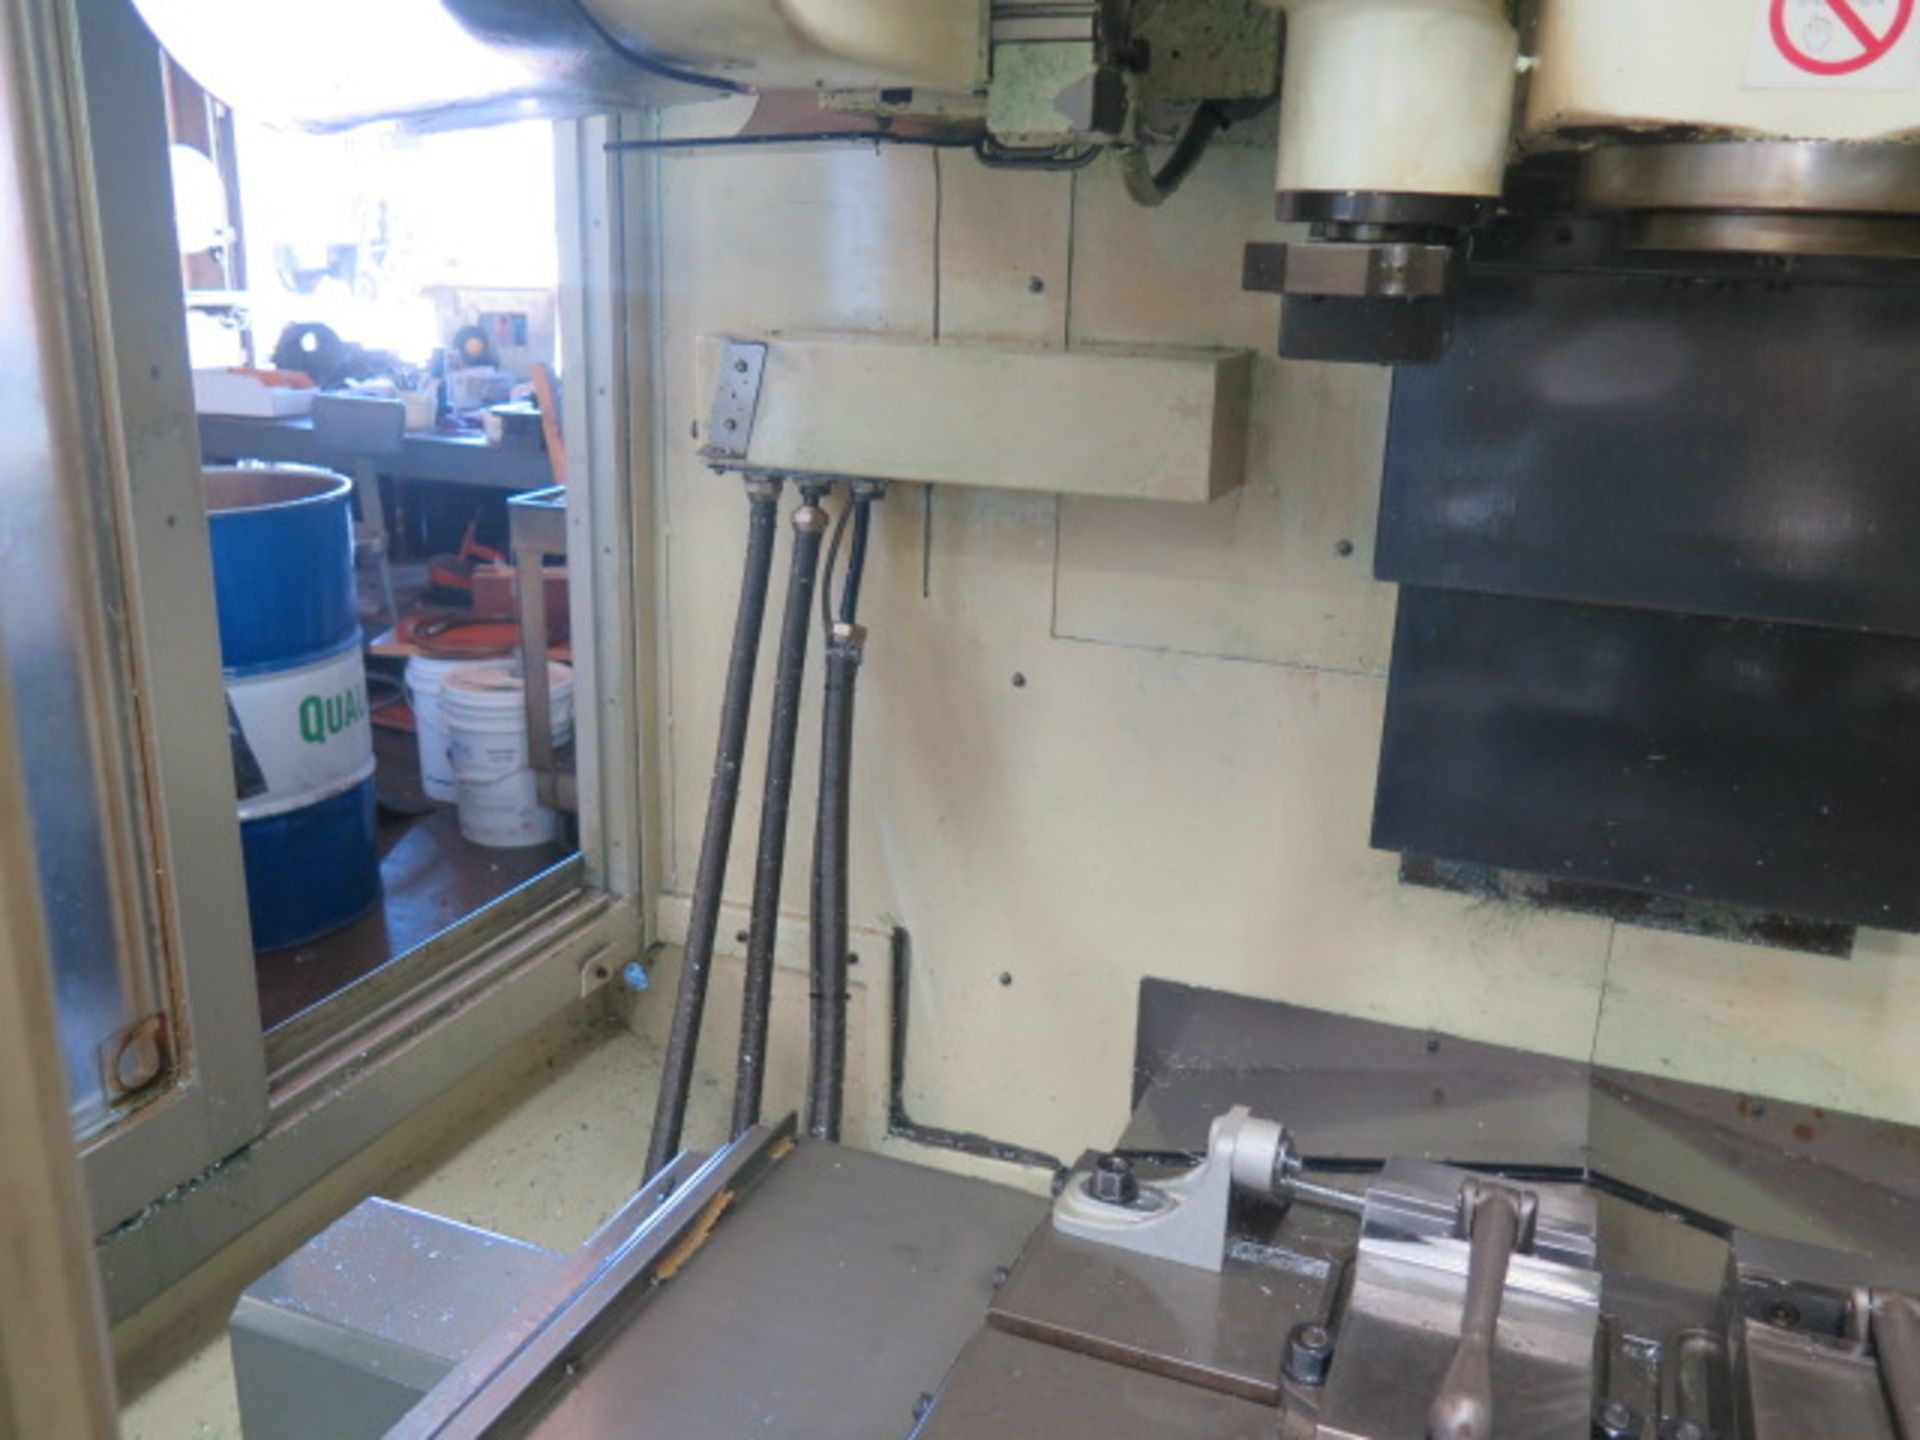 Kitamura Mycenter-1 CNC Vertical Machining Center s/n 02996 w/ Fanuc Series 0-M Controls, SOLD AS IS - Image 9 of 13